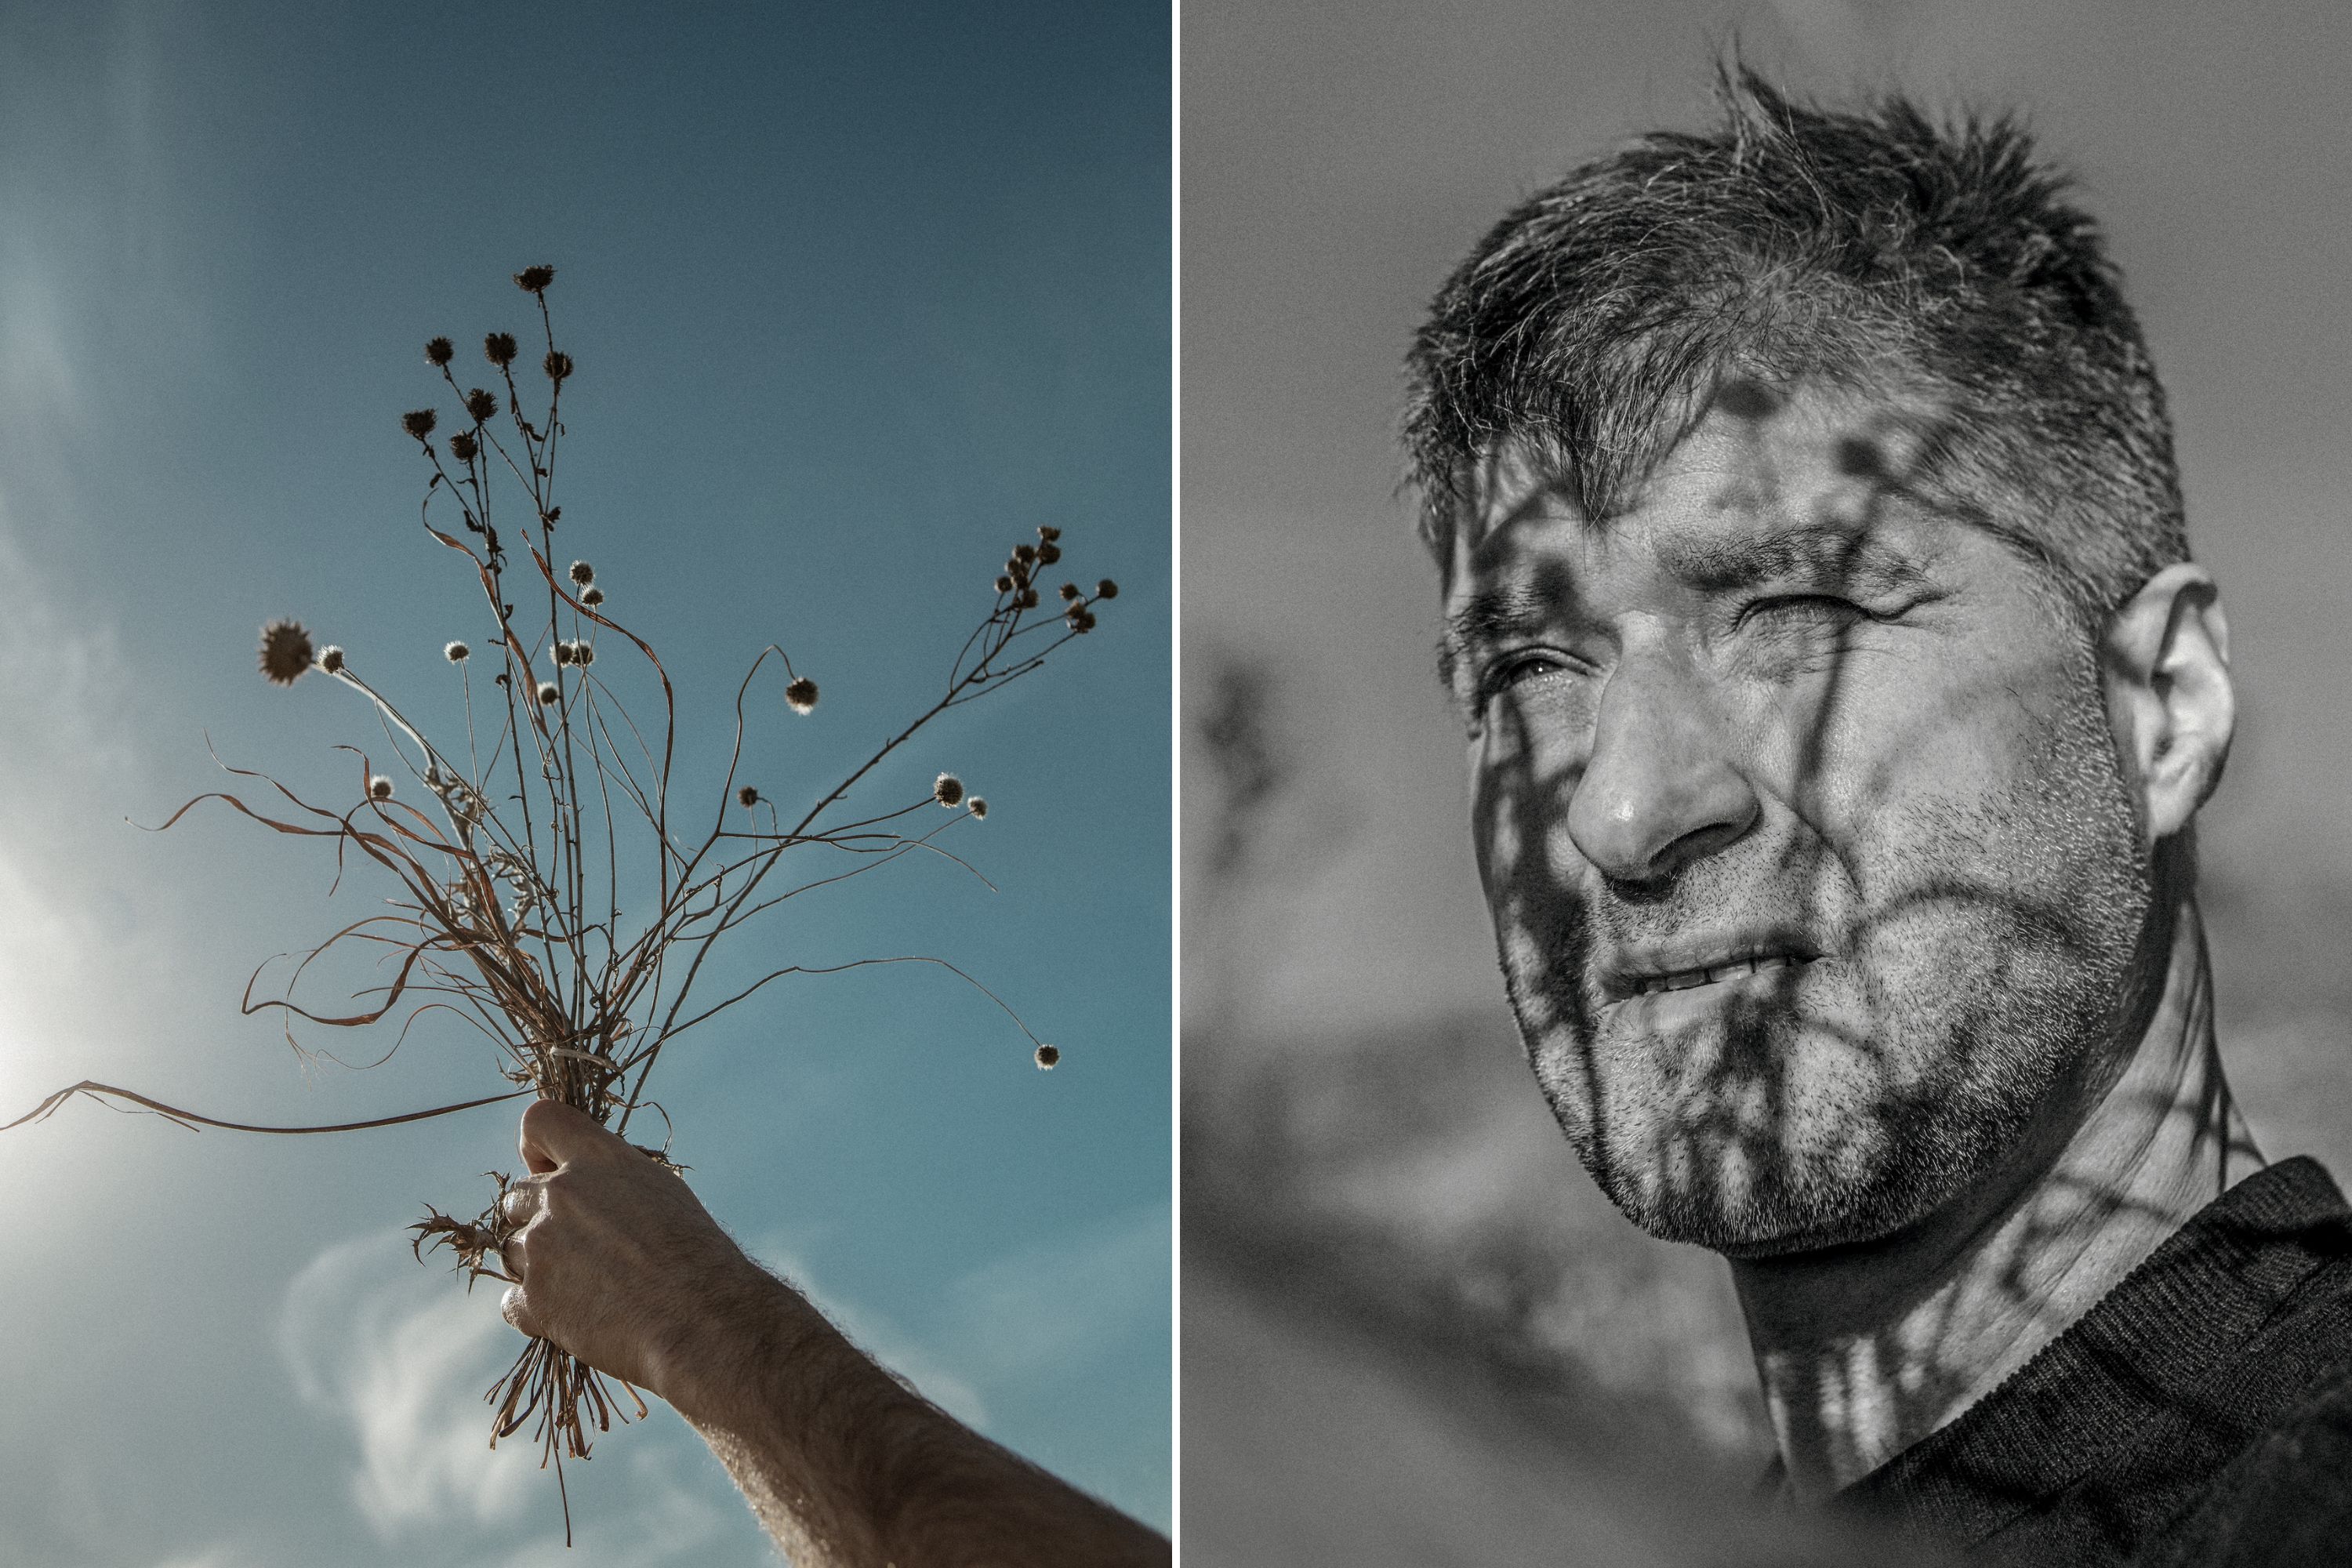 A collage of two images: a hand holds stems of grasses and flowers in one hand against the sky; a shadow of the stems falls on a man's face in a black and white photo.